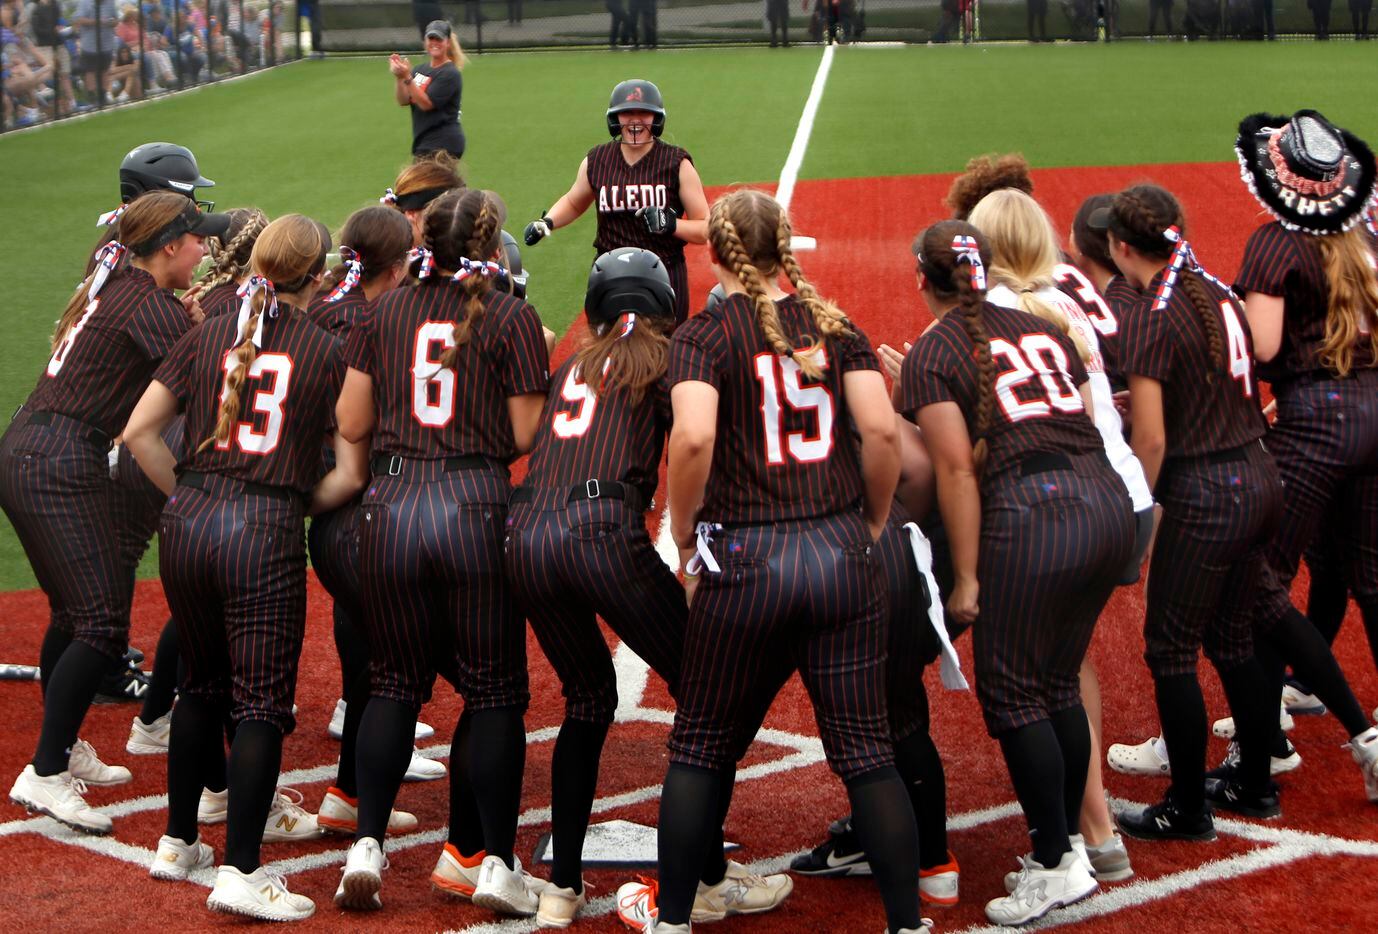 Aledo outfielder Marissa Powell (11) received quite the warm welcome from teammates gathered...